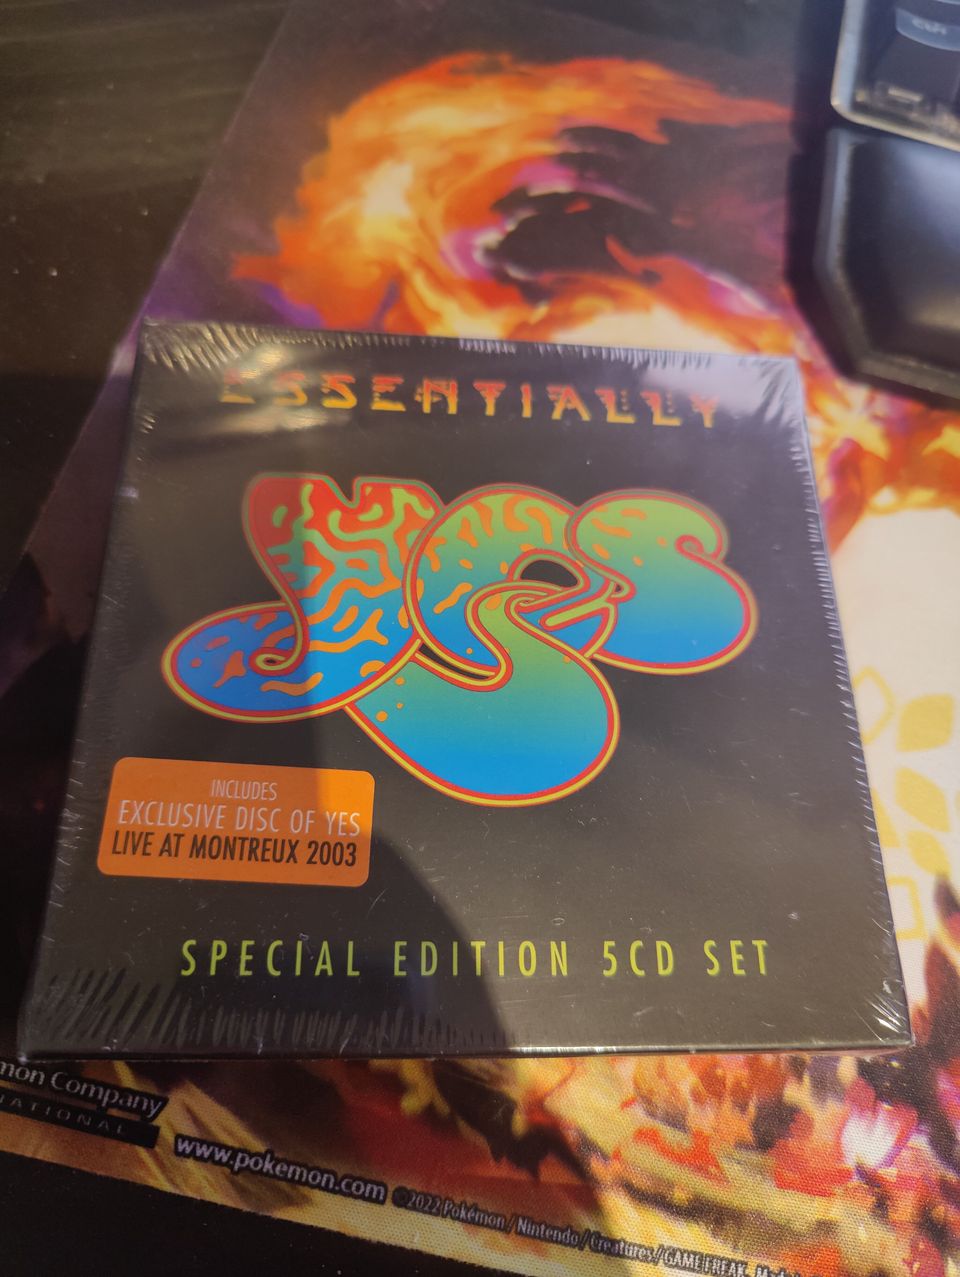 Yes essentially special edition 5cd set mint